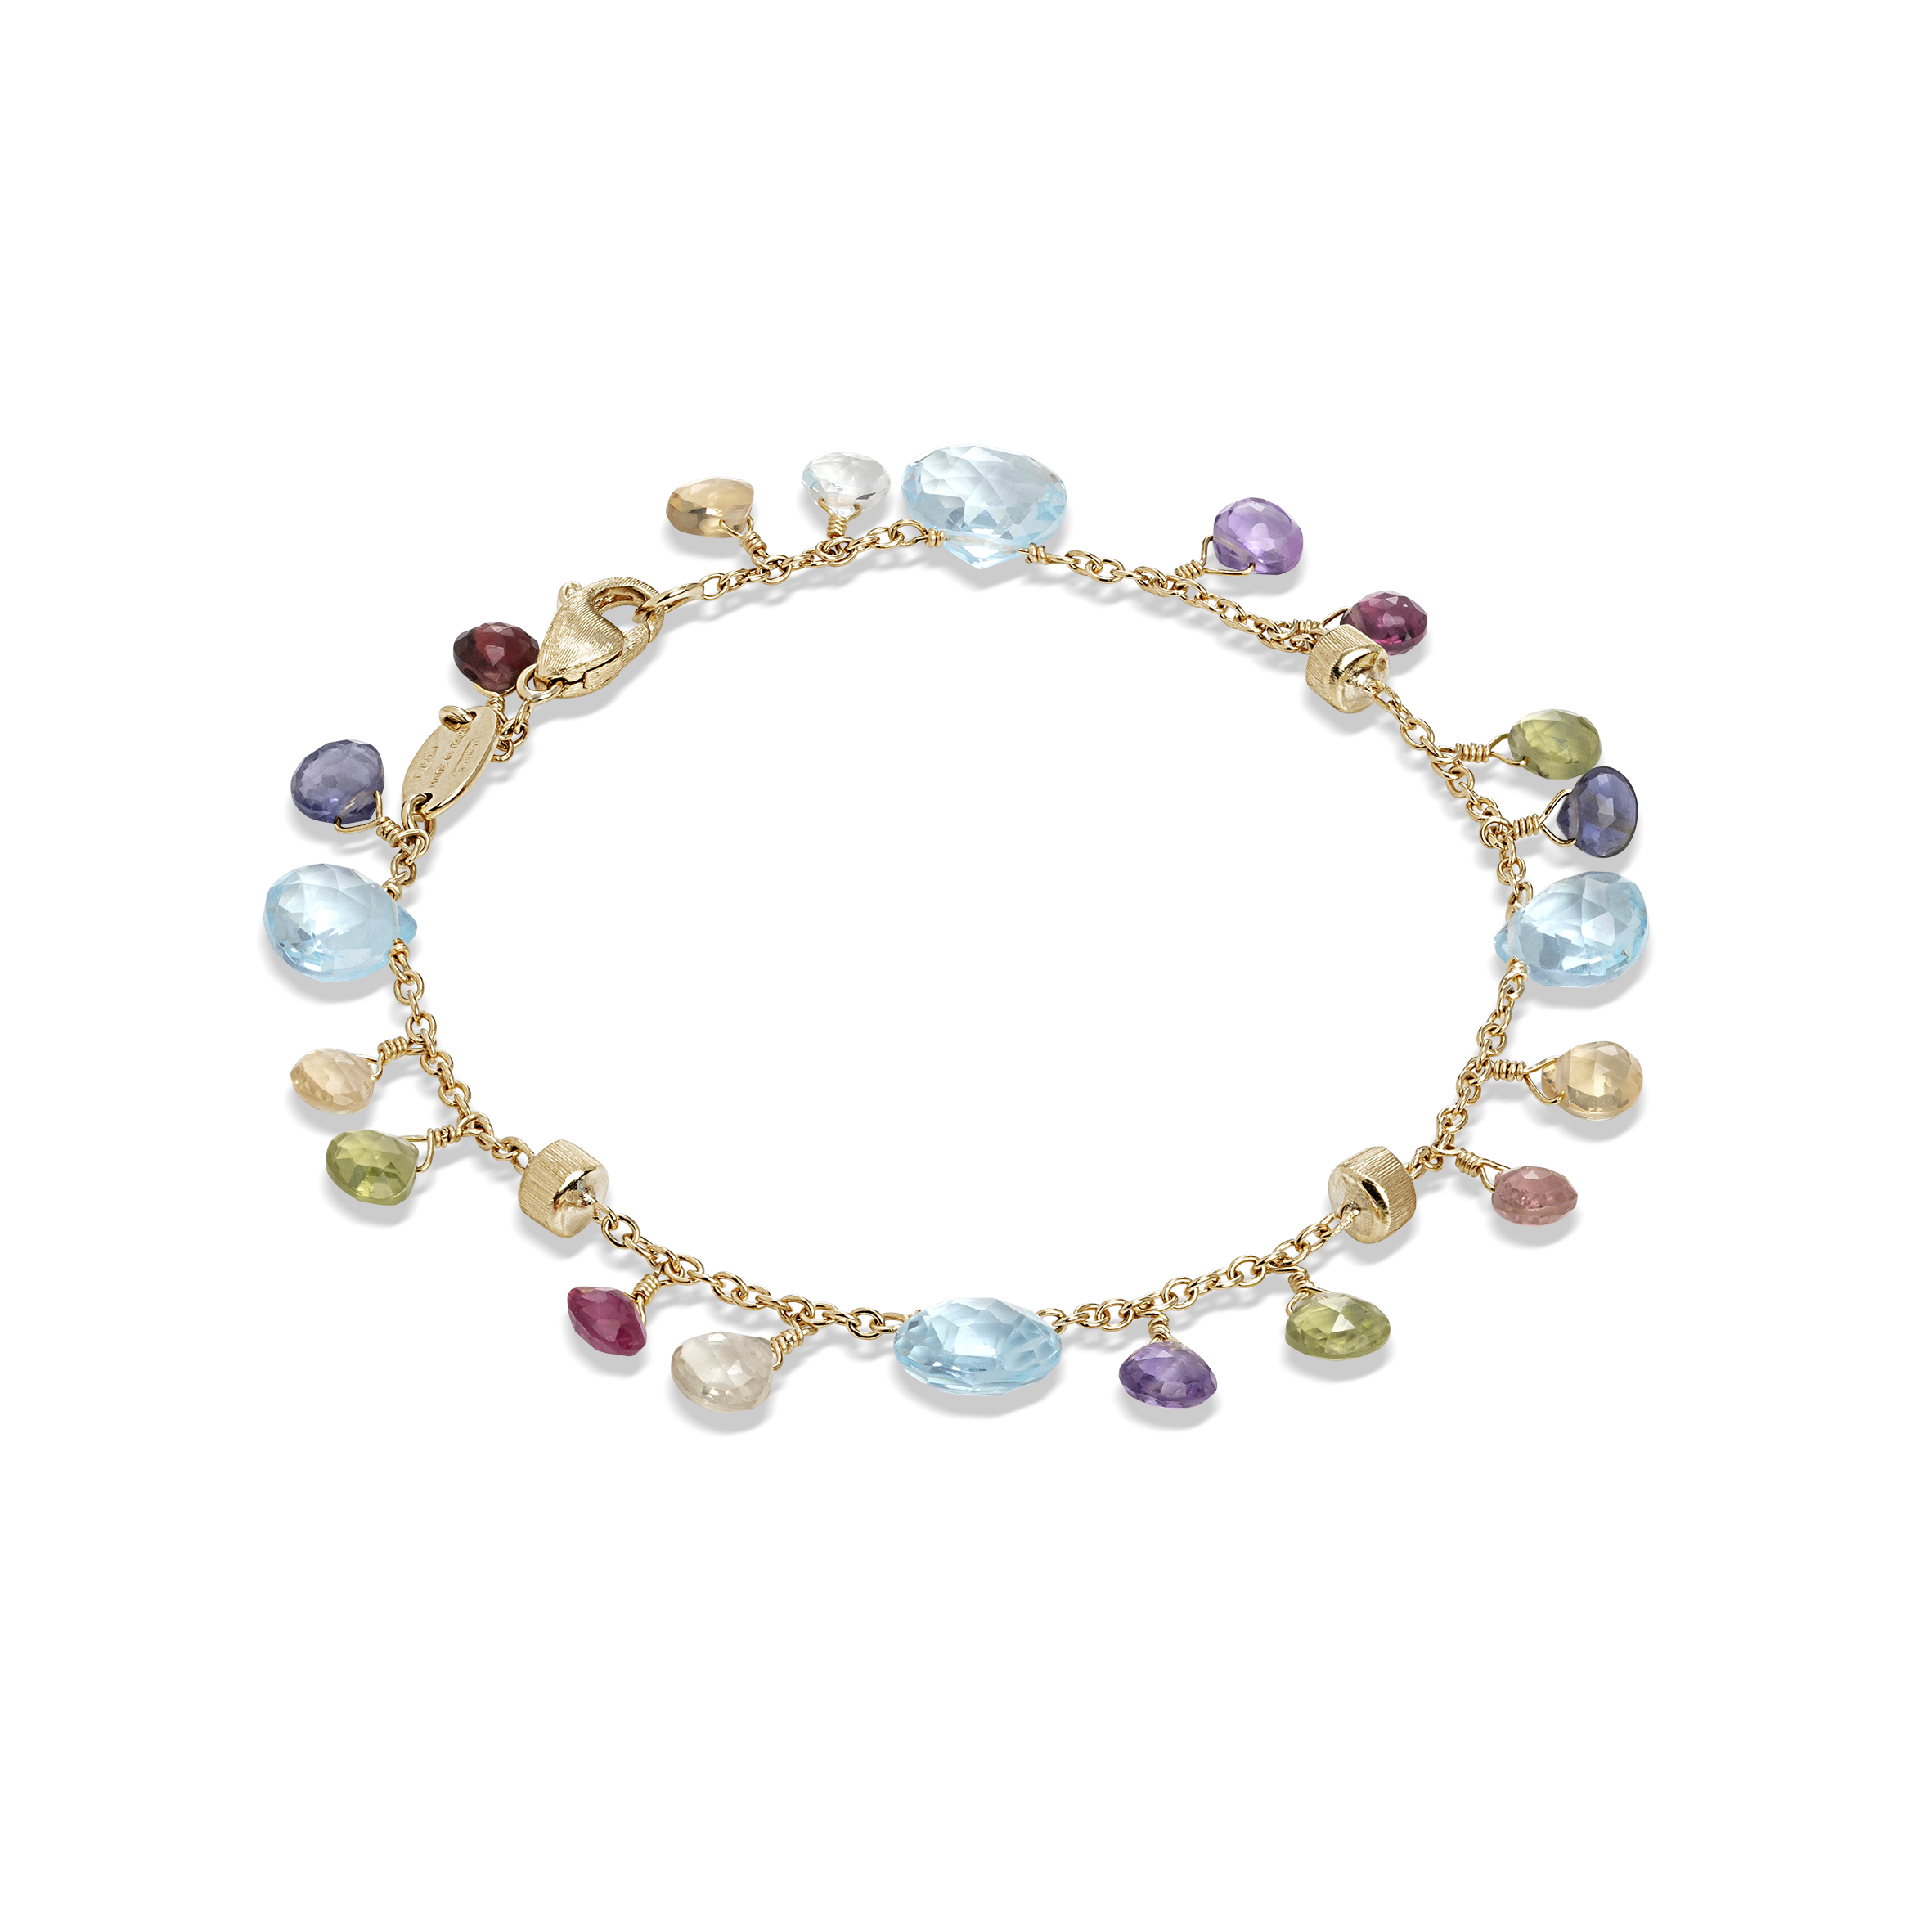 BB2584 MIX01T Y 02Marco Bicego Paradise Collection 18k Yellow Gold Blue Topaz and Mixed Gemstone Single Strand Bracelet